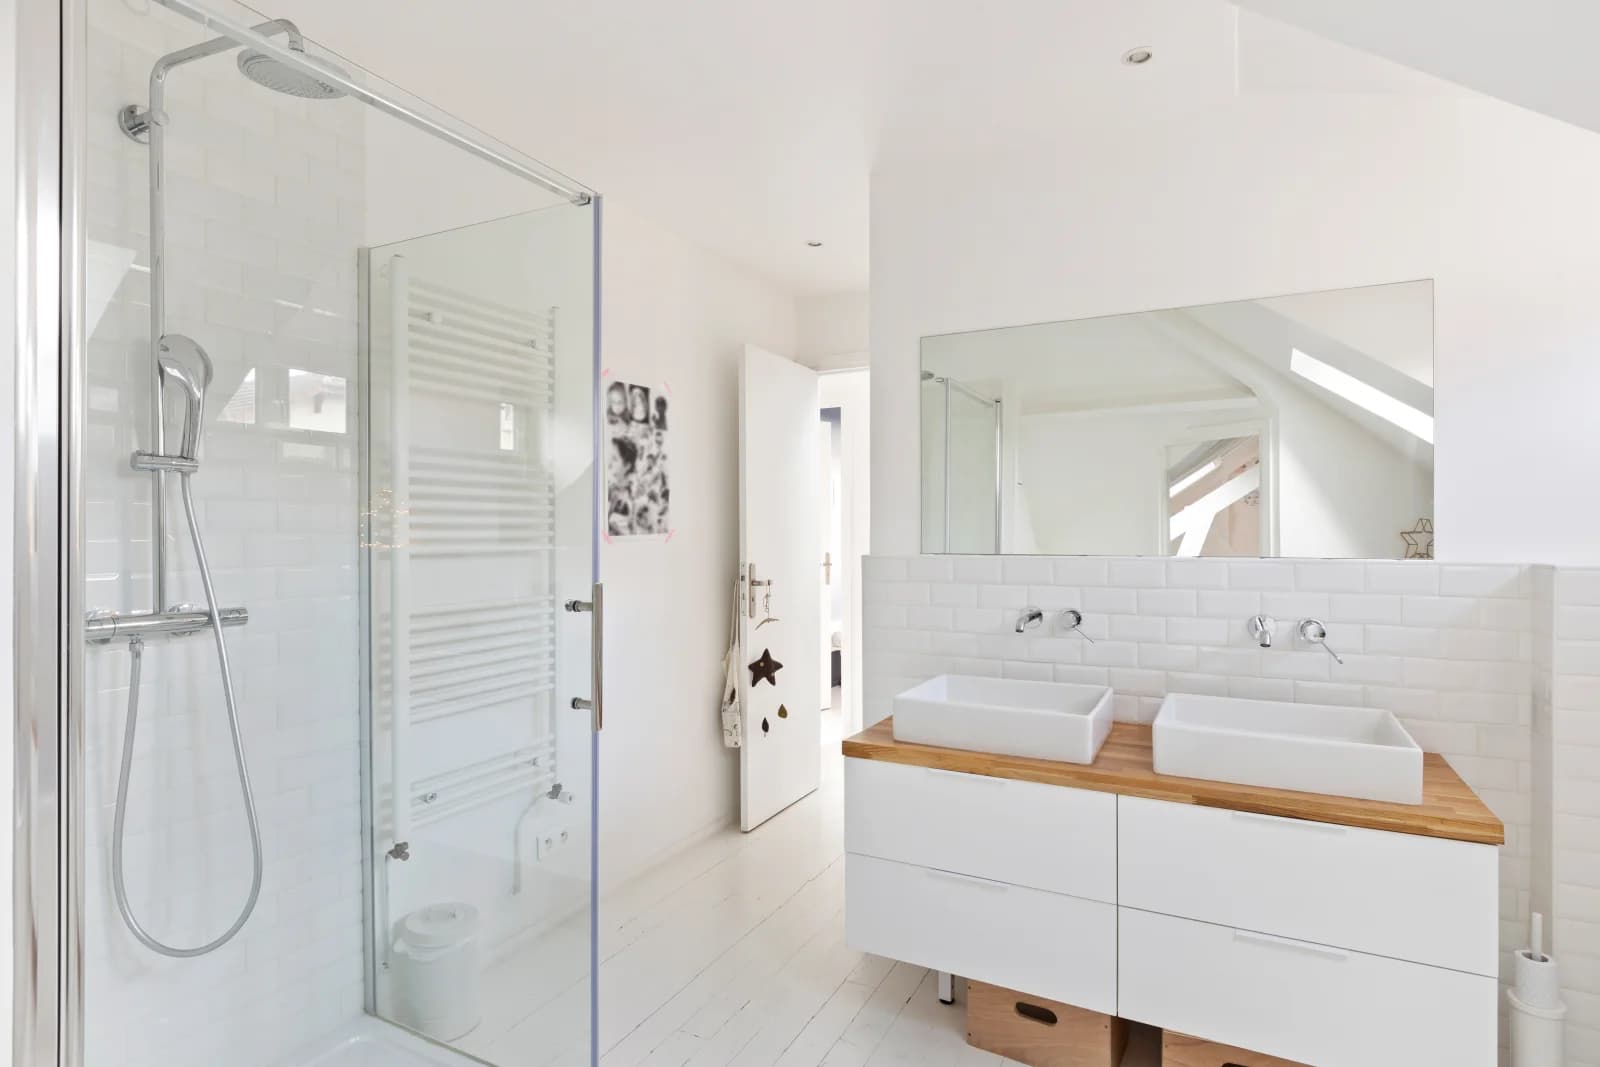 Bathroom in 100m² of green space to take a step back - 1